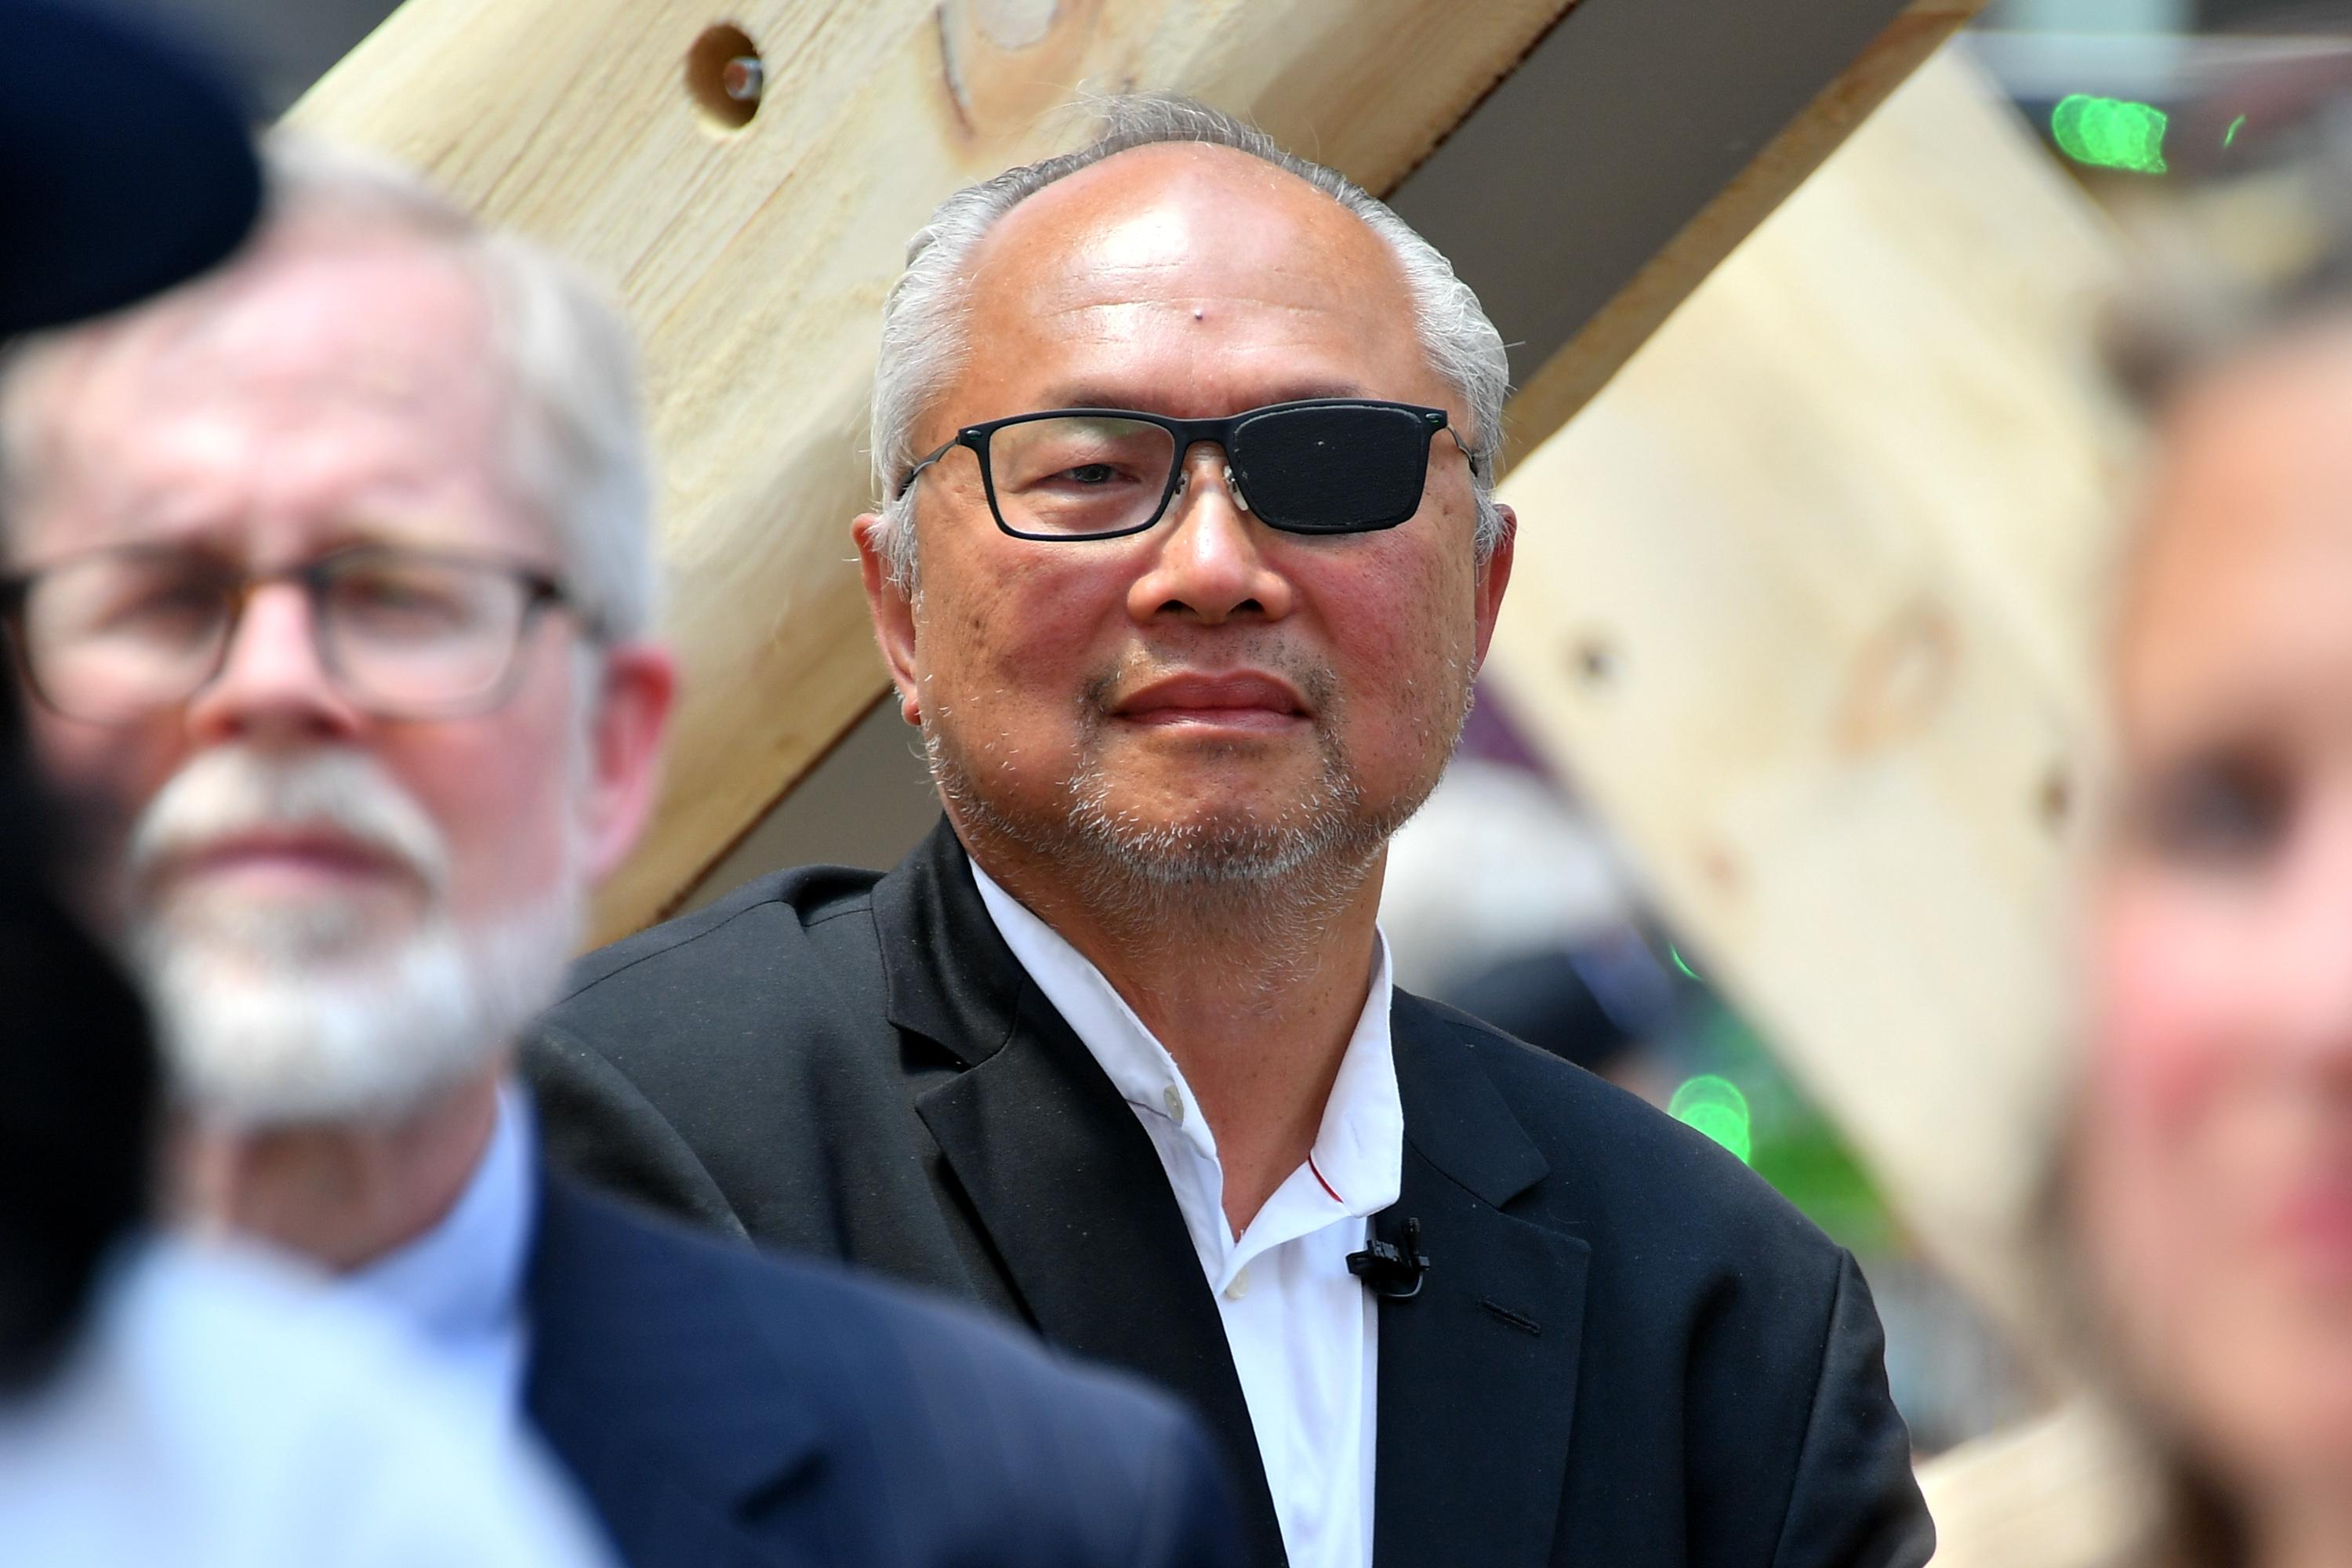 A man with very short white hair, wearing glasses in which one lens is completely blacked out.